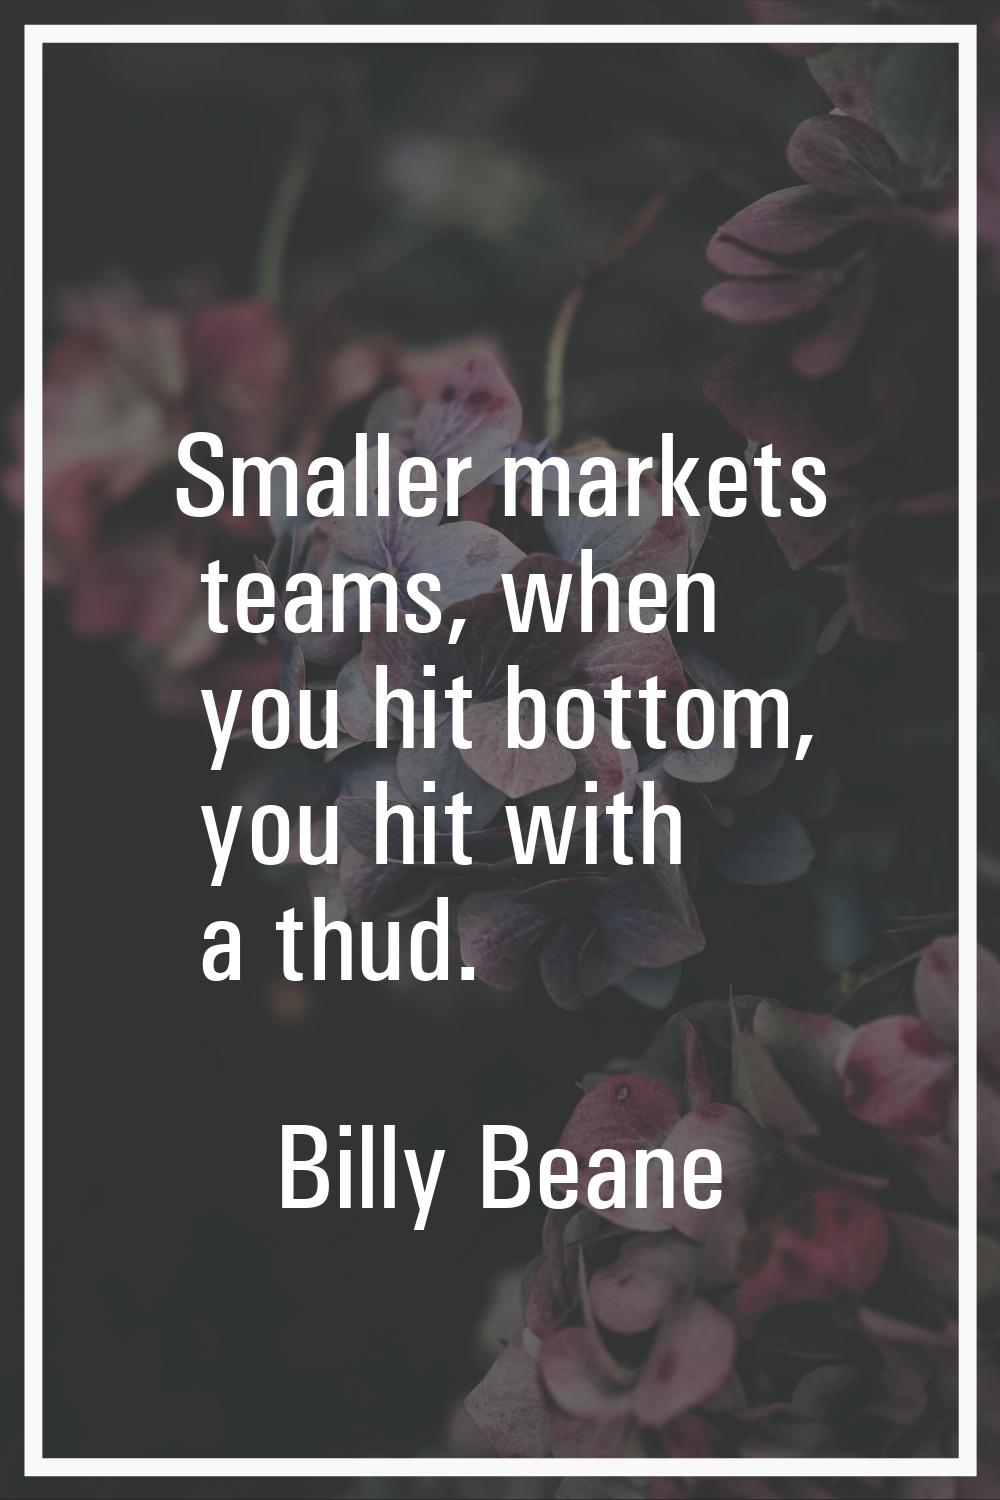 Smaller markets teams, when you hit bottom, you hit with a thud.